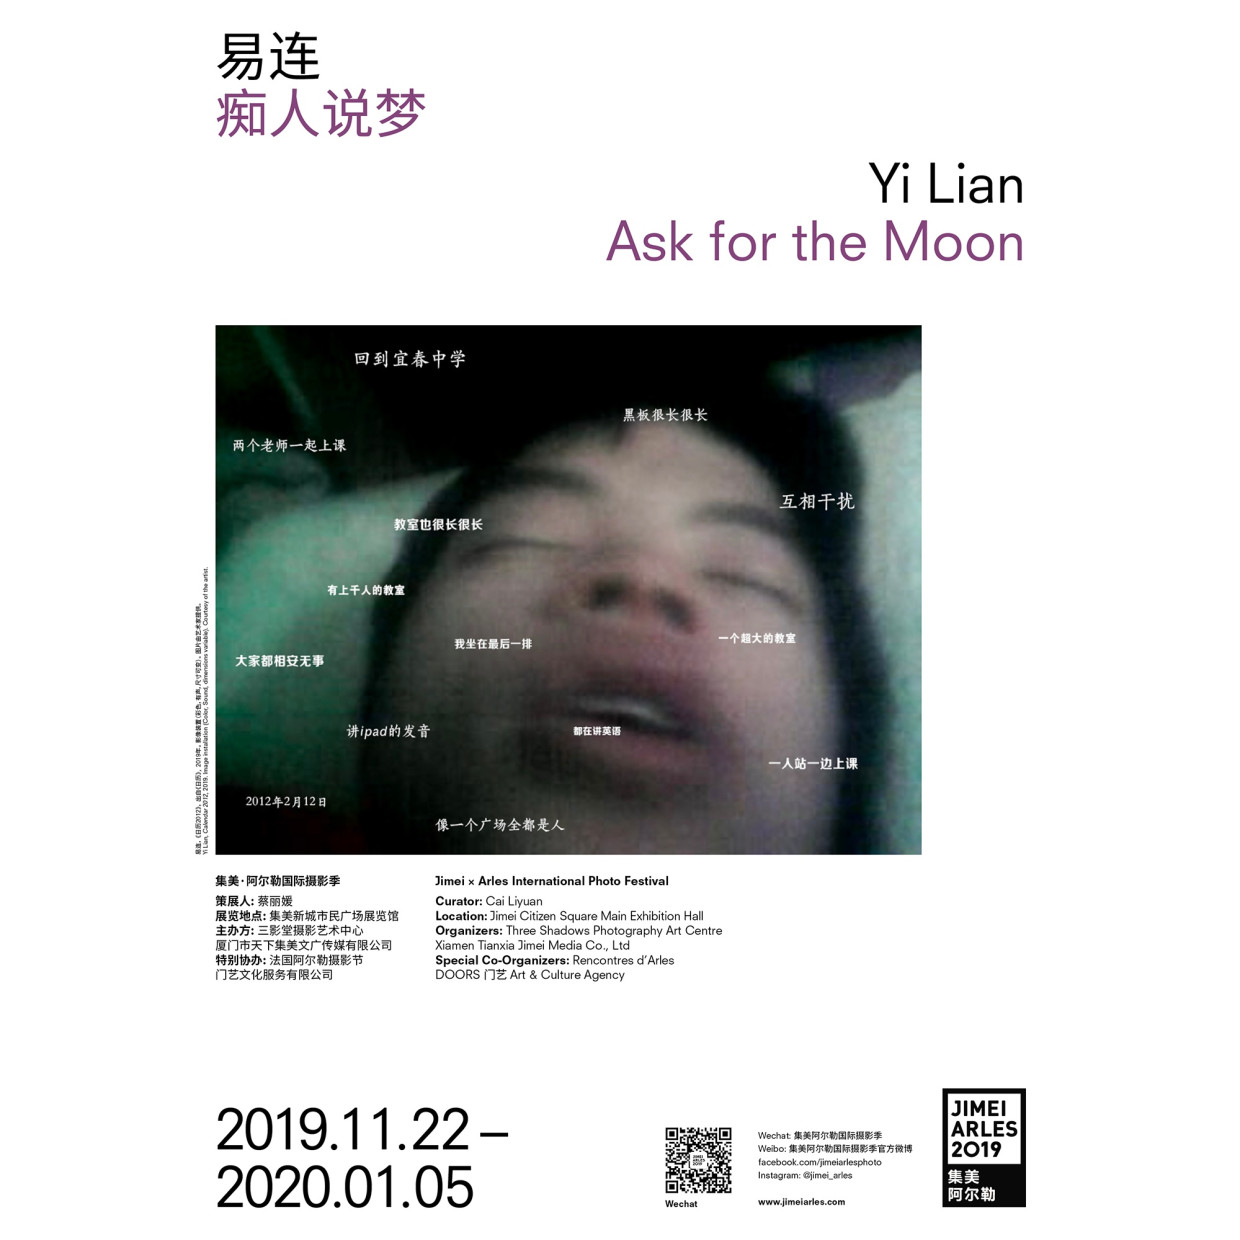 YI LIAN ASK FOR THE MOON CURATED BY CAI LIYUAN In 2010, Yi Lian started to record his dreams. He...